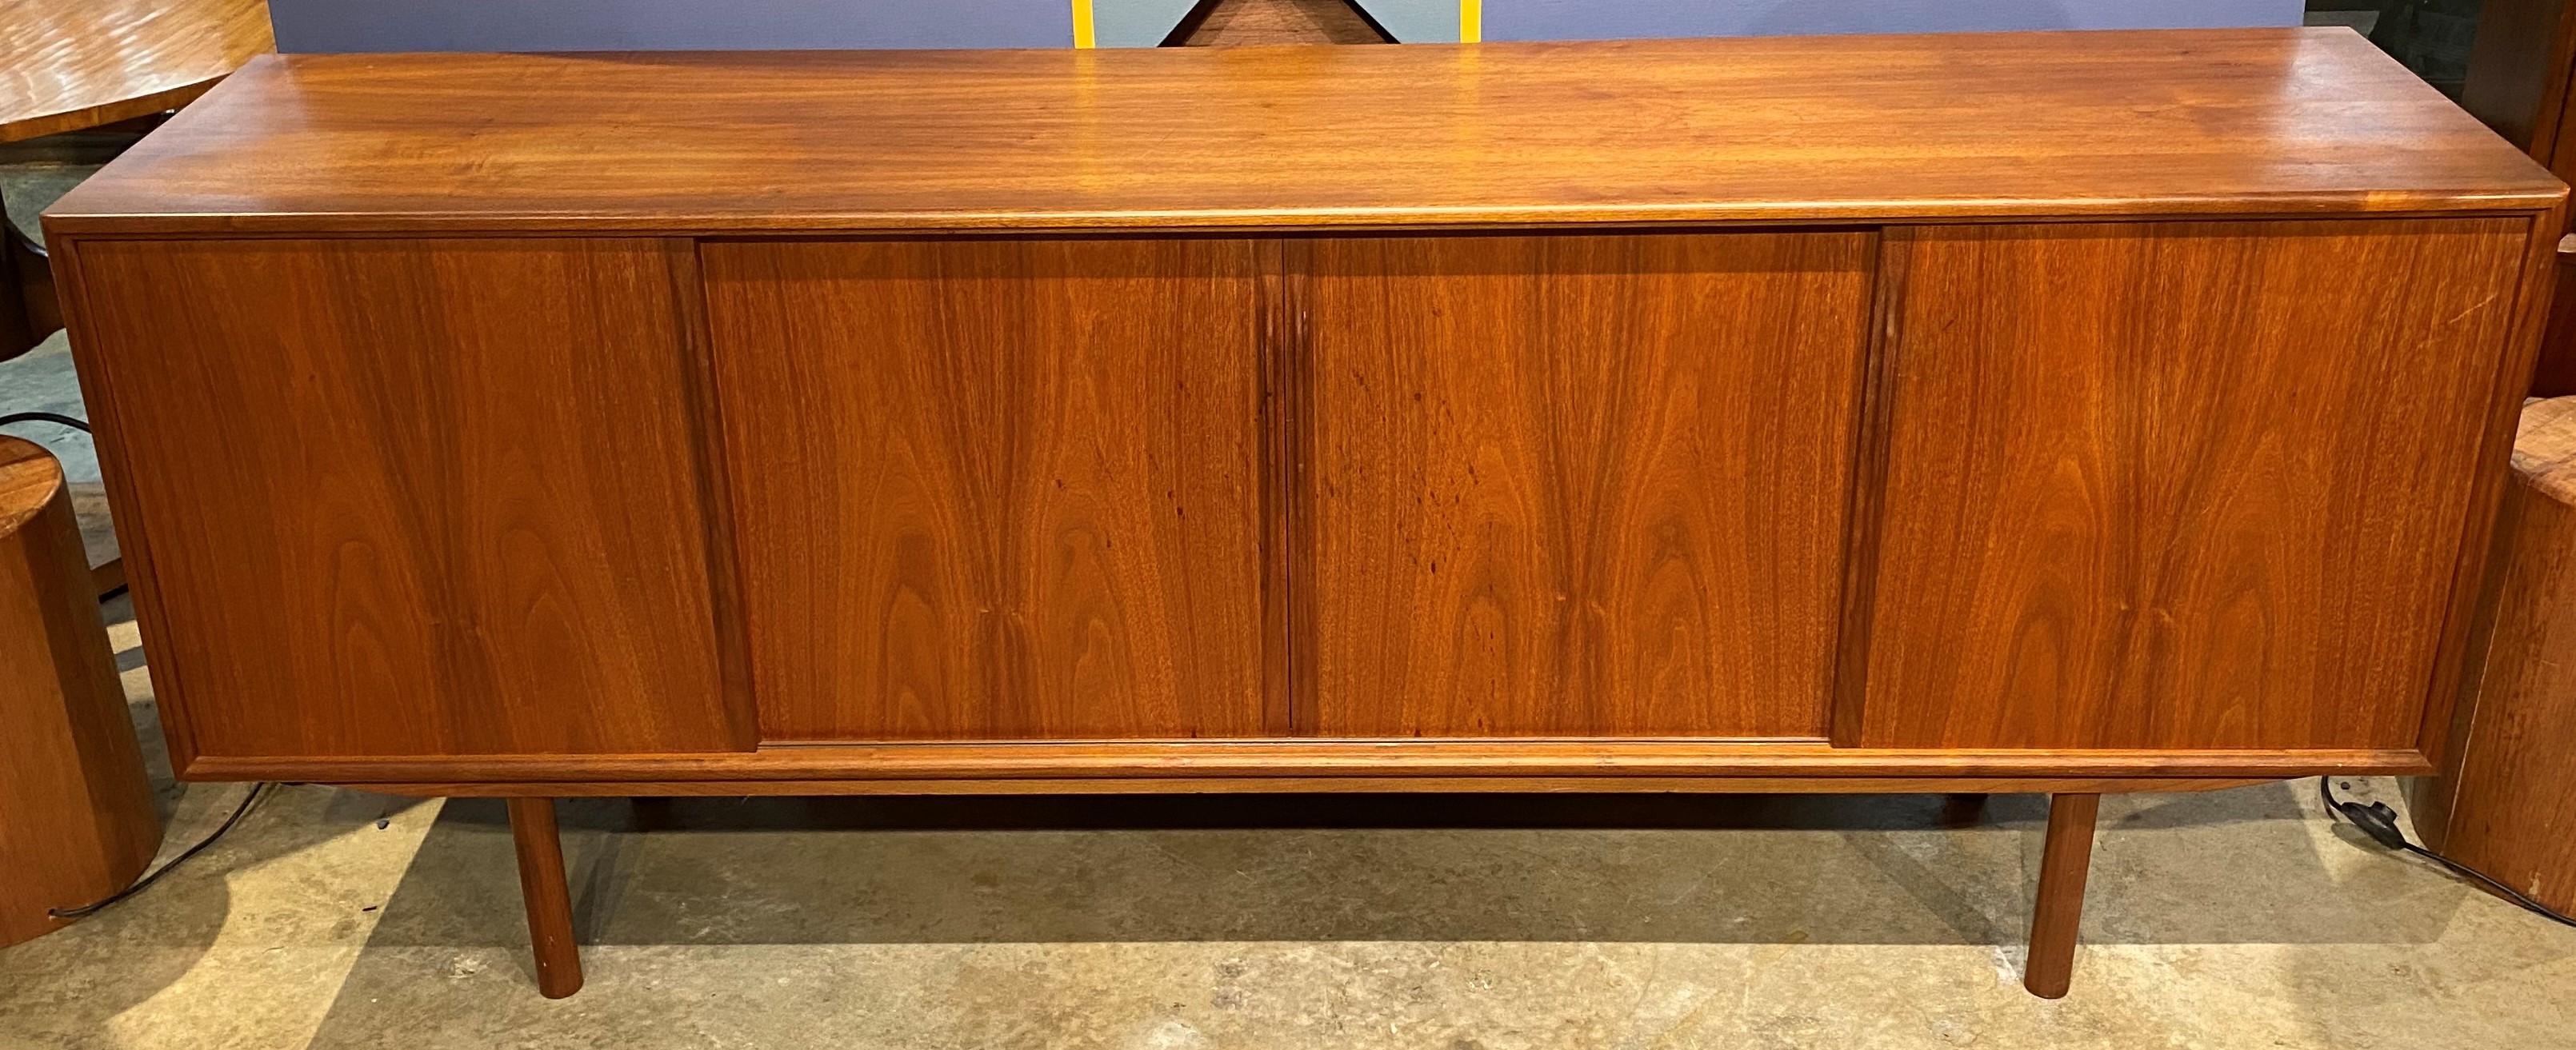 A fine example of a sleak designed Mid-Century Modern Danish teak credenza designed by Axel Christensen Odder, with four front track sliding doors, one of which opens to three felt lined drawers, and the other three open to a single interior storage